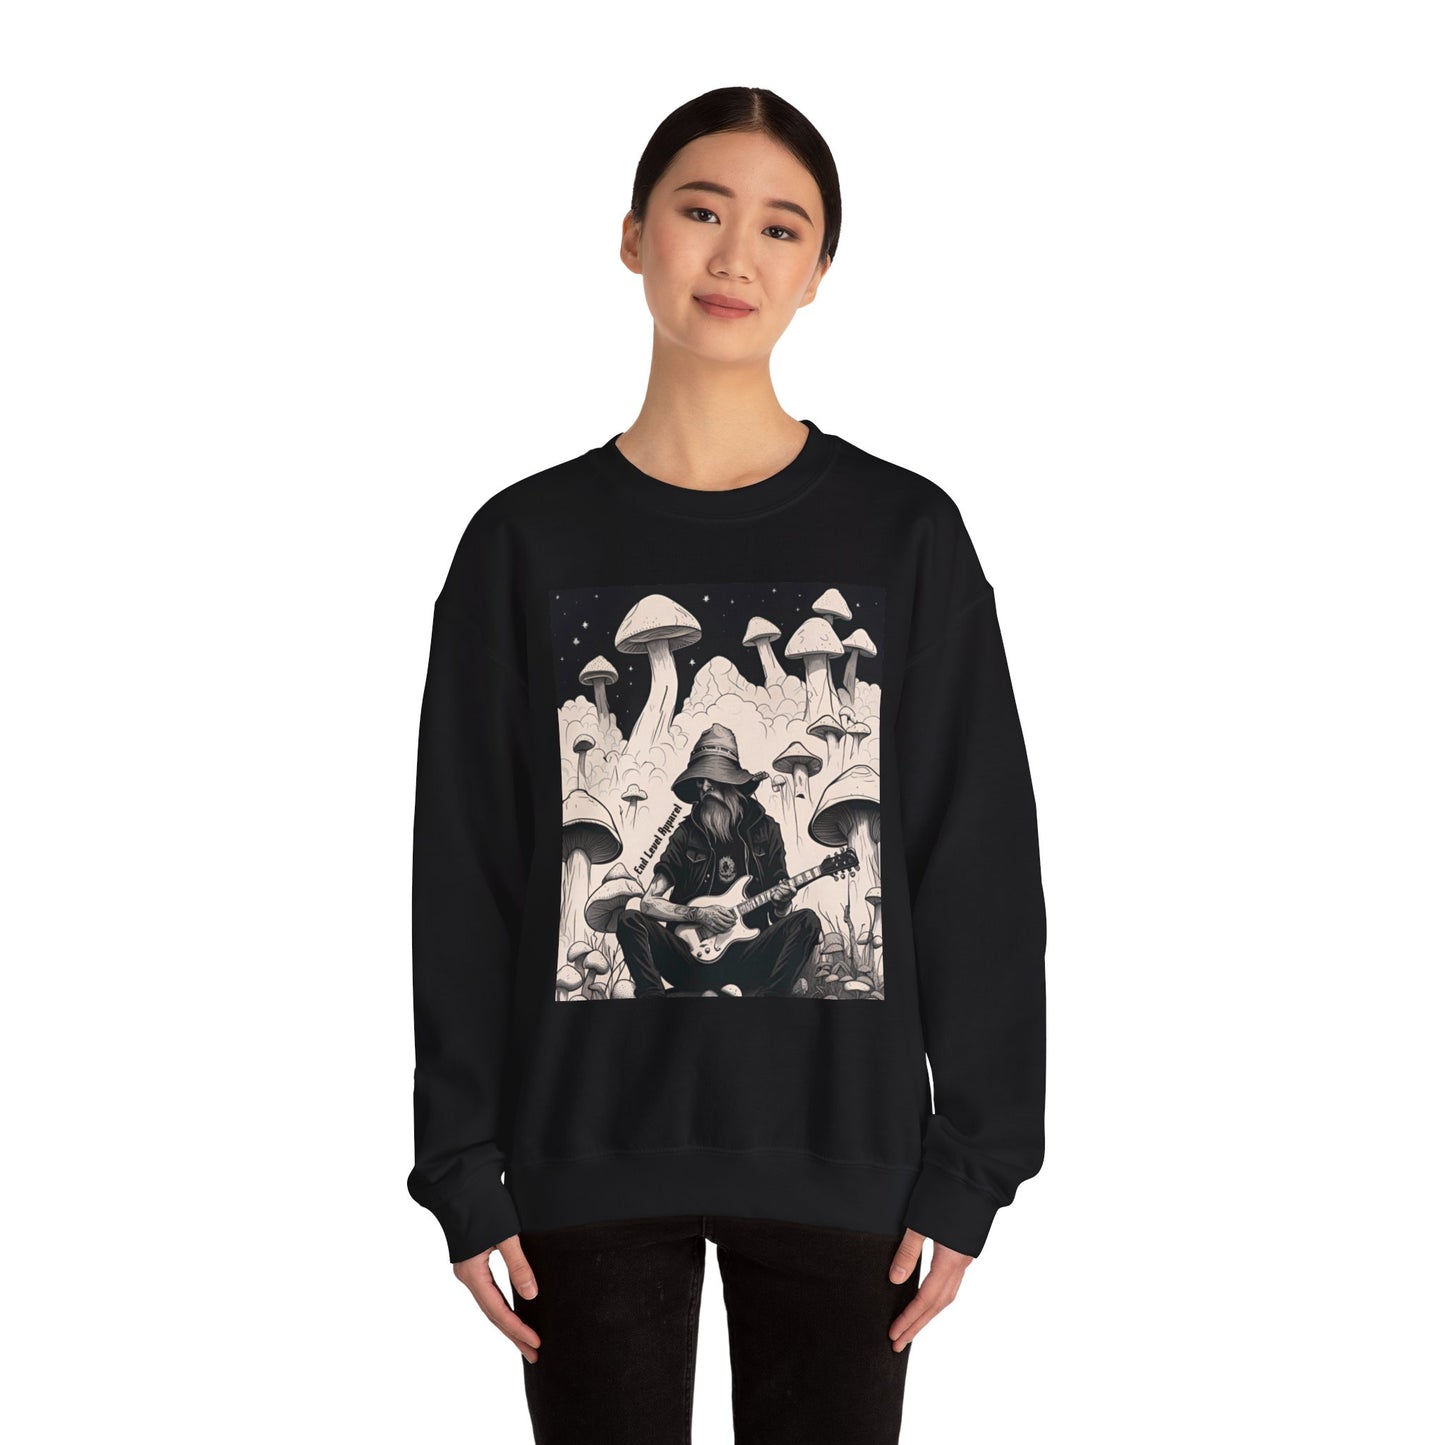 Fosterson James Long Sleeve